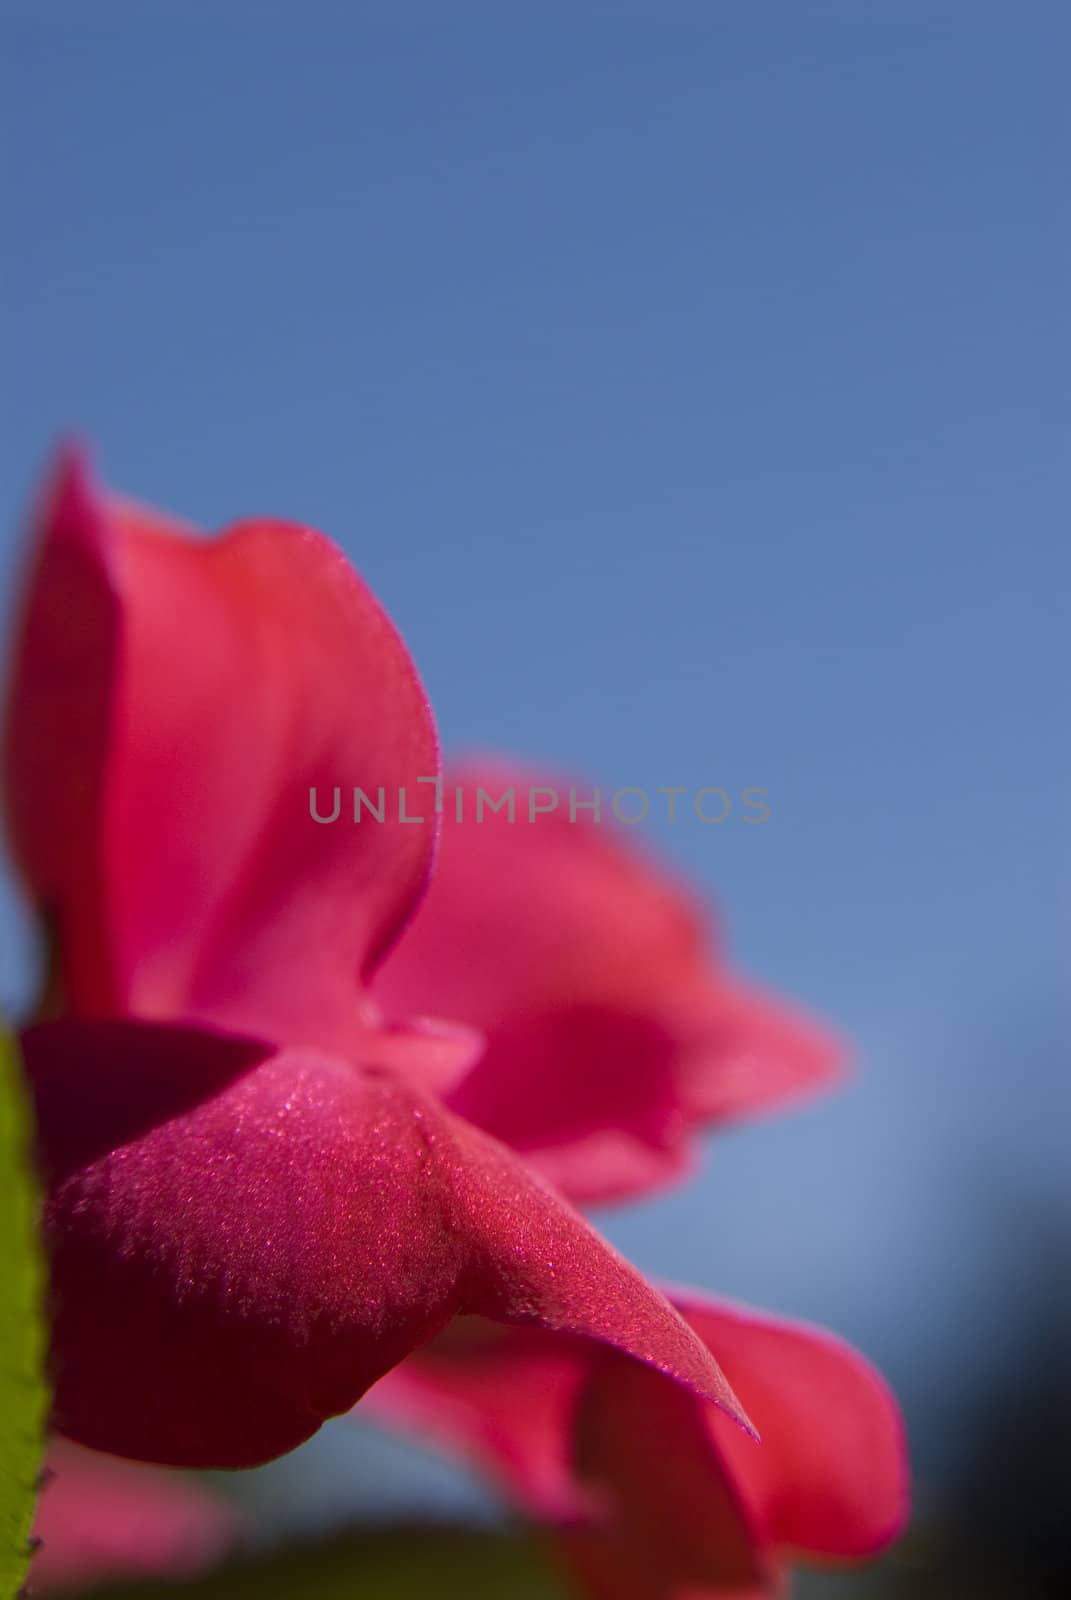 Close-up shallow depth of field image of a red flower against a bright clear blue sky